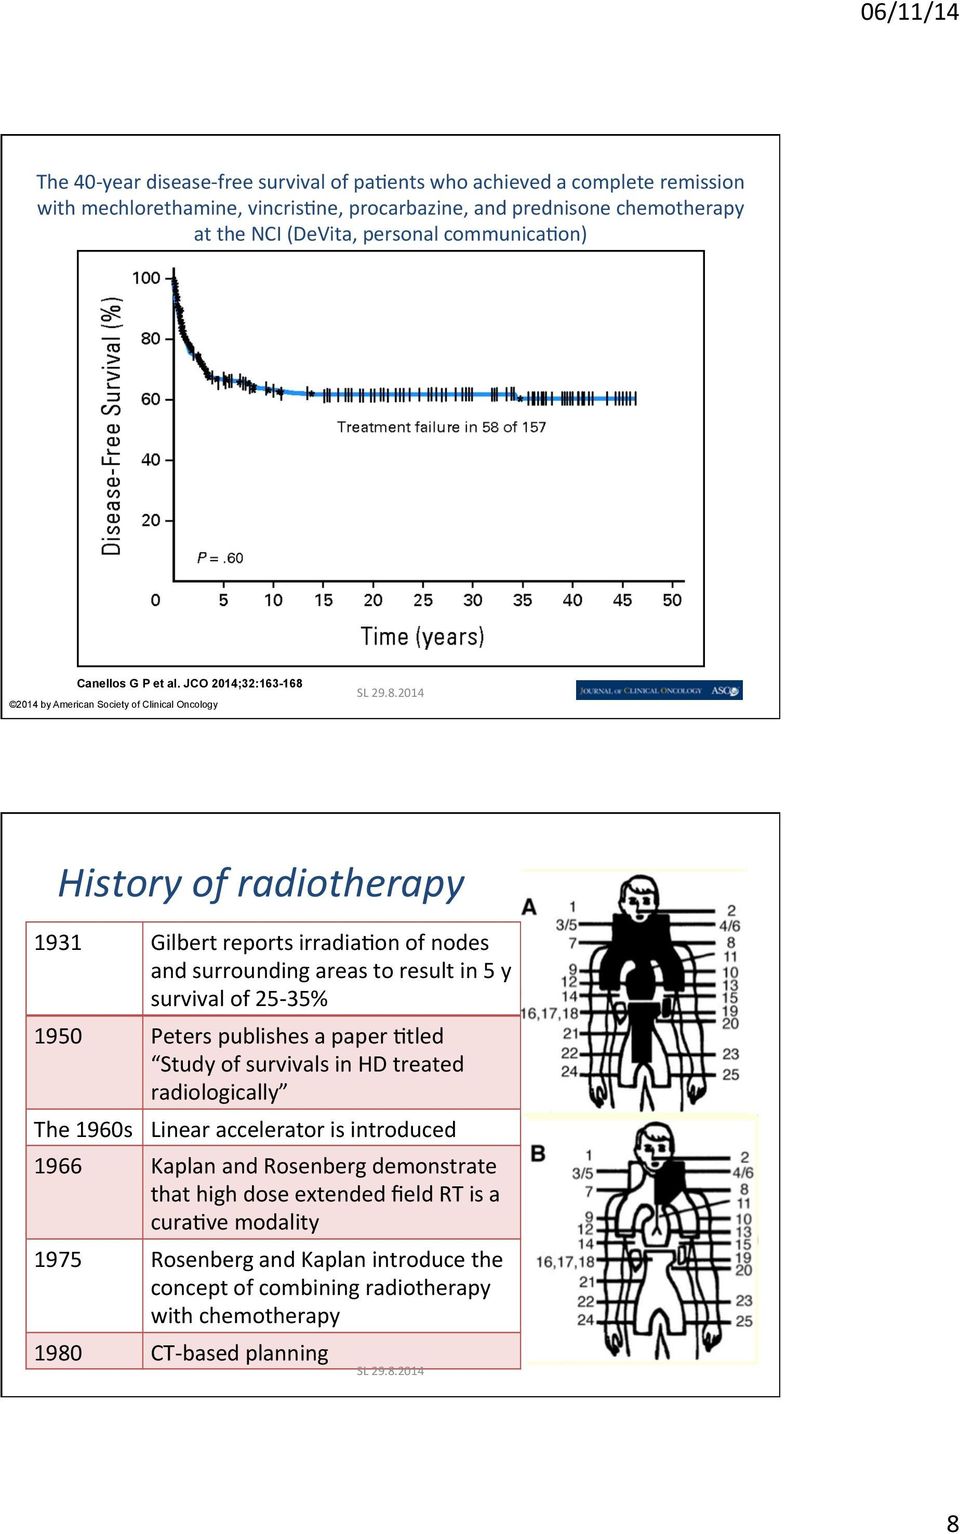 JCO 2014;32:163-168 2014 by American Society of Clinical Oncology History of radiotherapy 1931 Gilbert reports irradia_on of nodes and surrounding areas to result in 5 y survival of